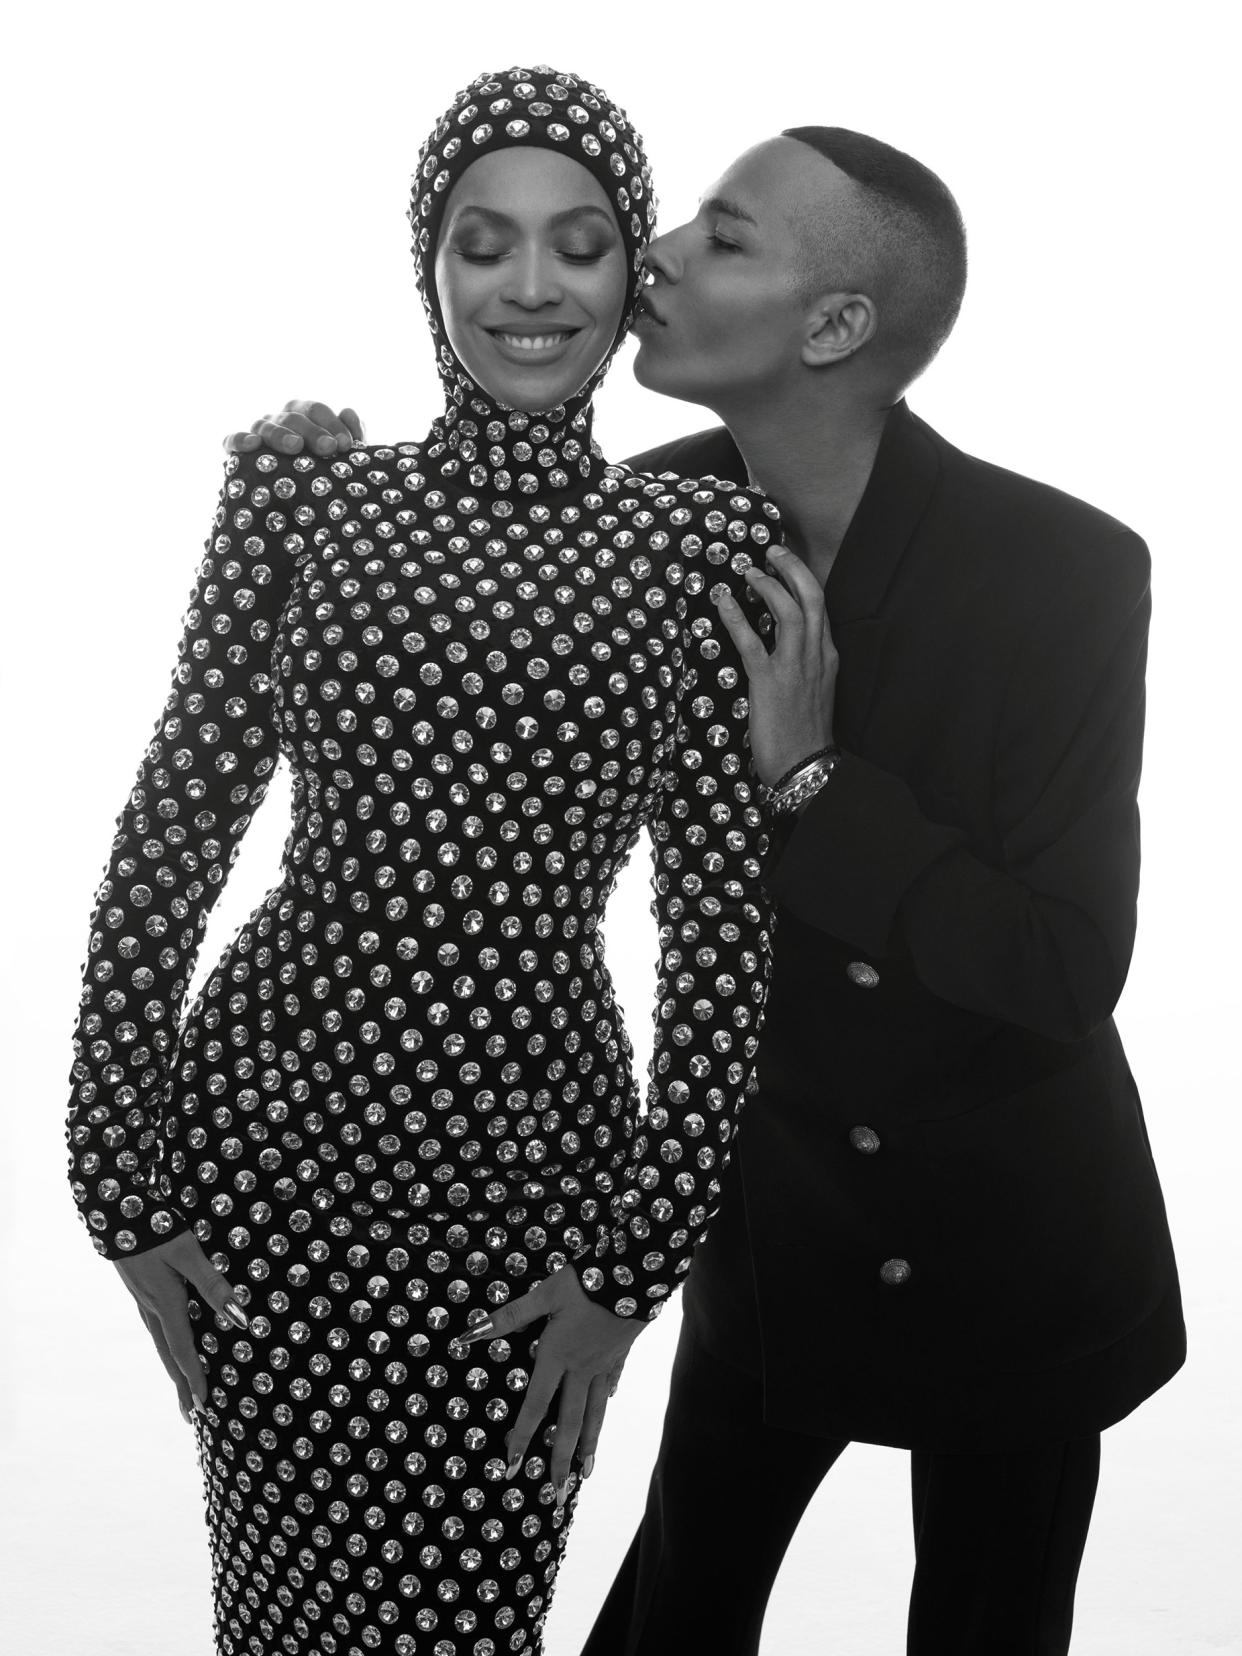 Beyonce with designer Olivier Rousteing. (Louie Banks / Vogue France)